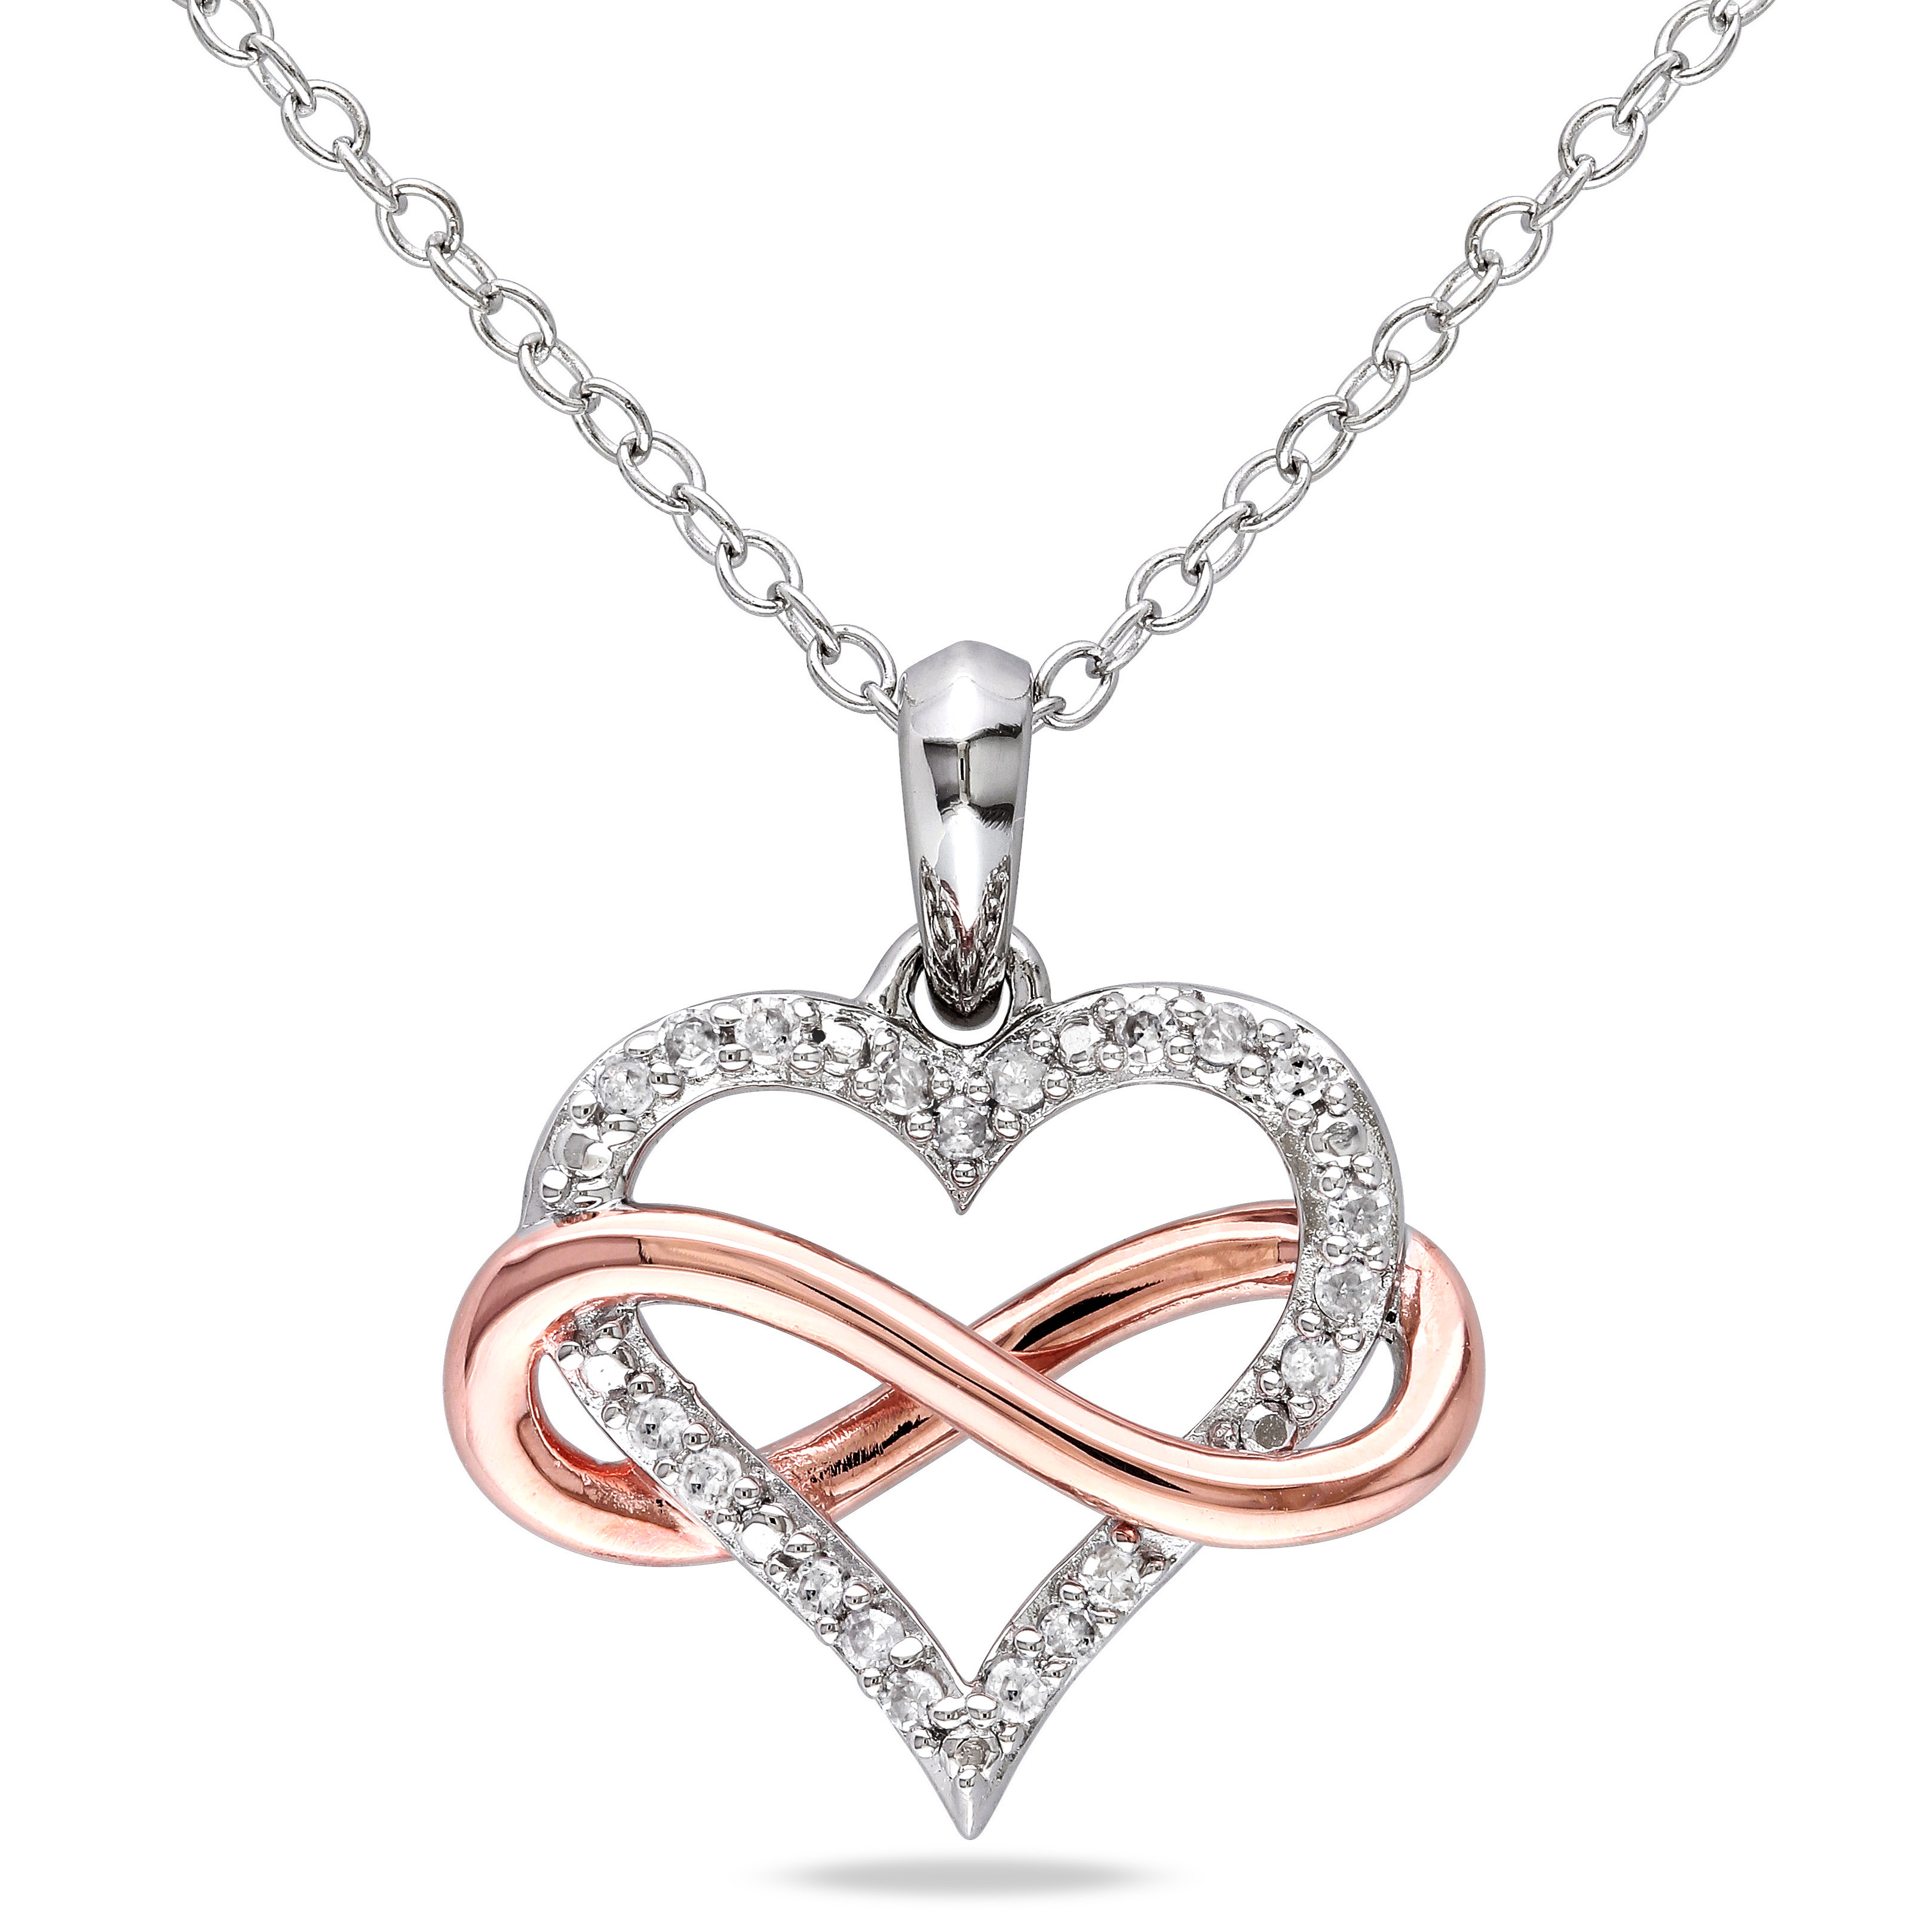 1/10 CT TW Diamond Infinity Heart Pendant with Chain in 2-Tone Pink and White Sterling Silver